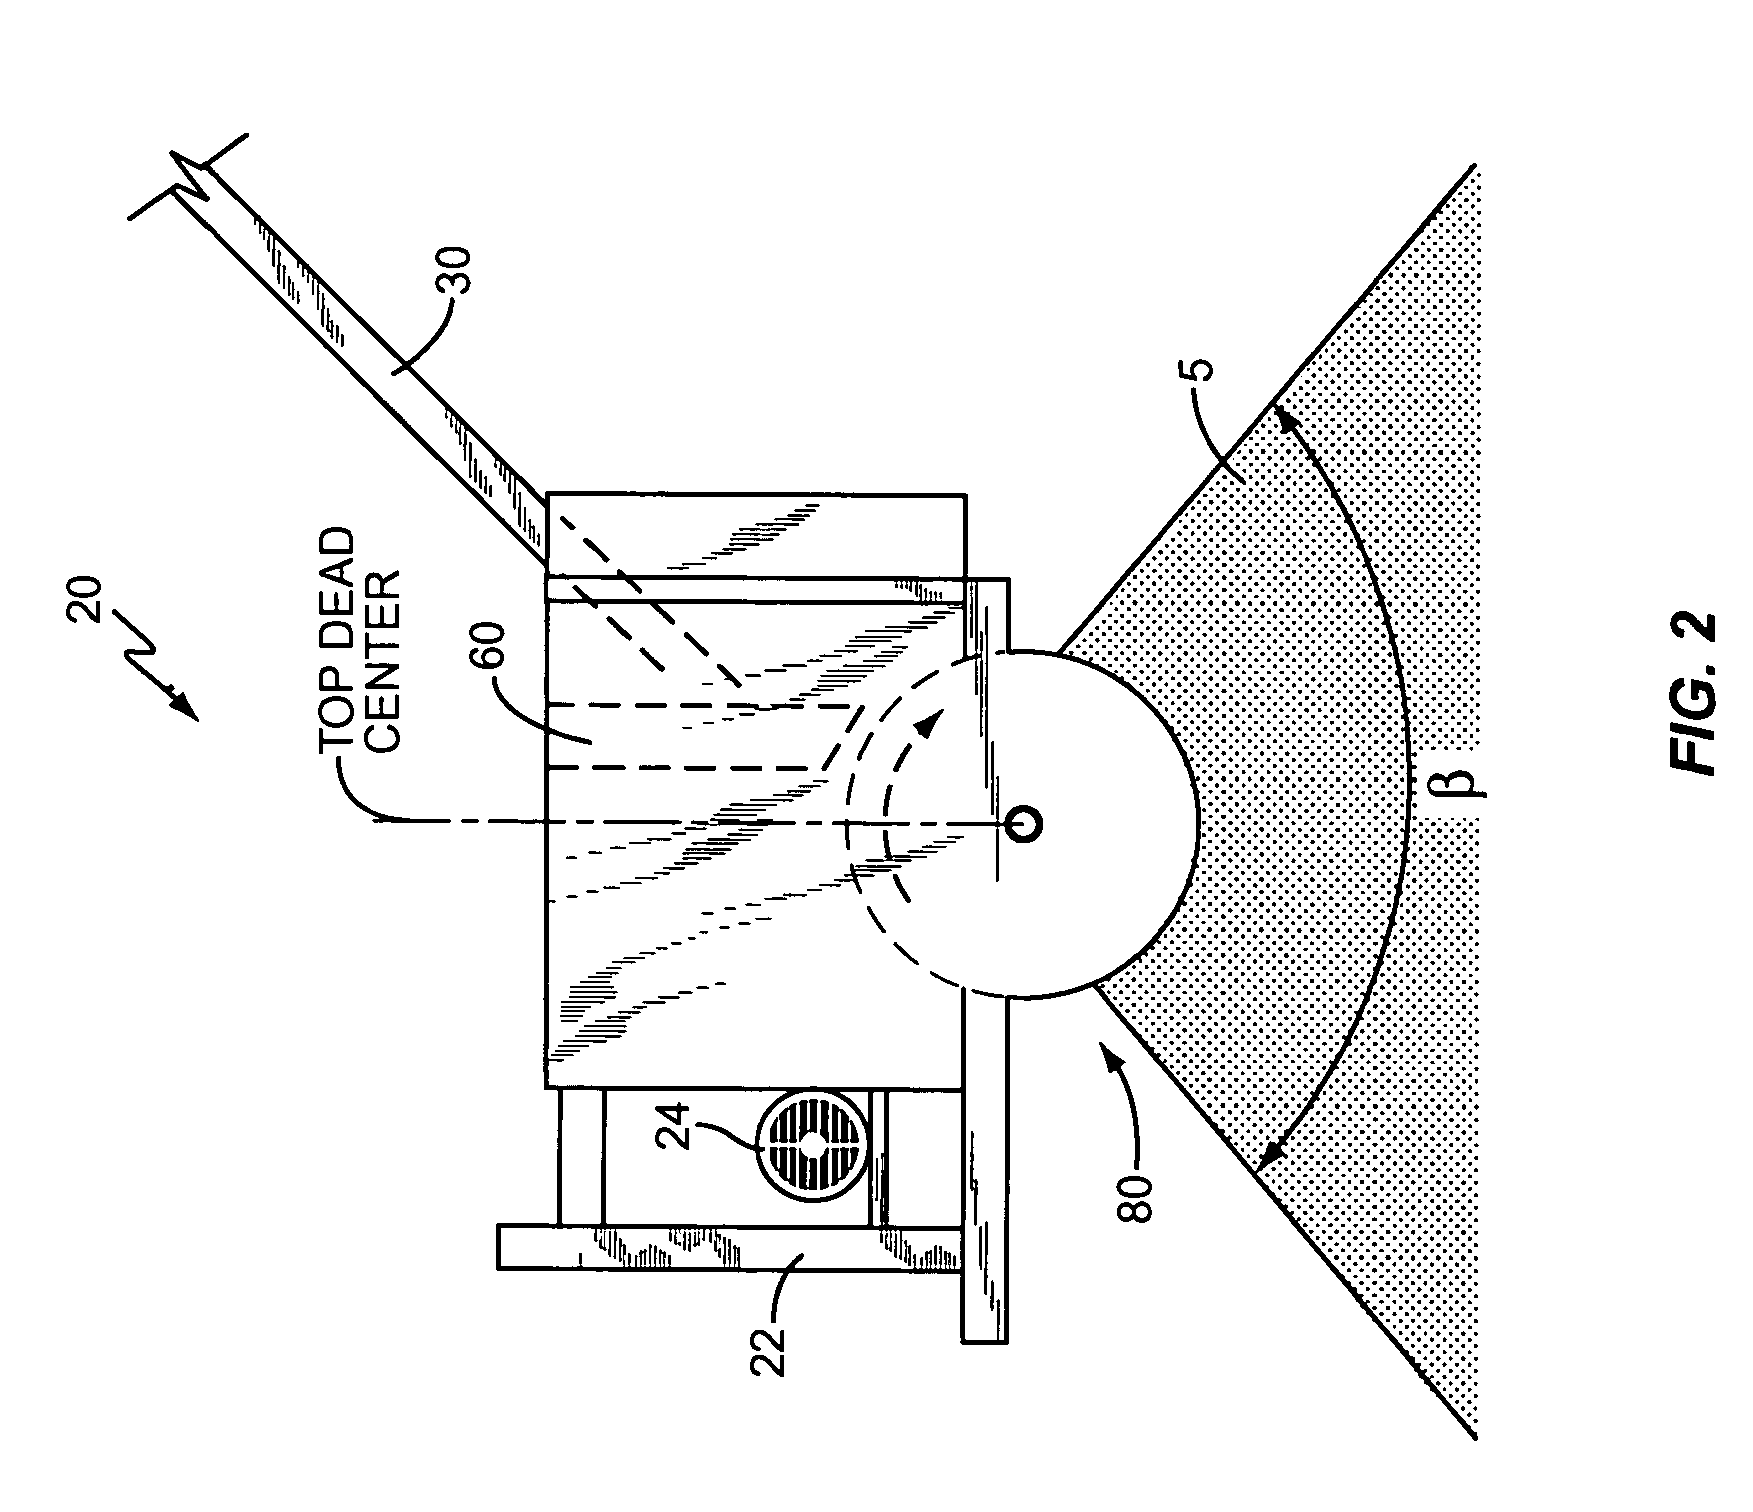 Wood chip flinger and method of densely packing wood chips with large angle output